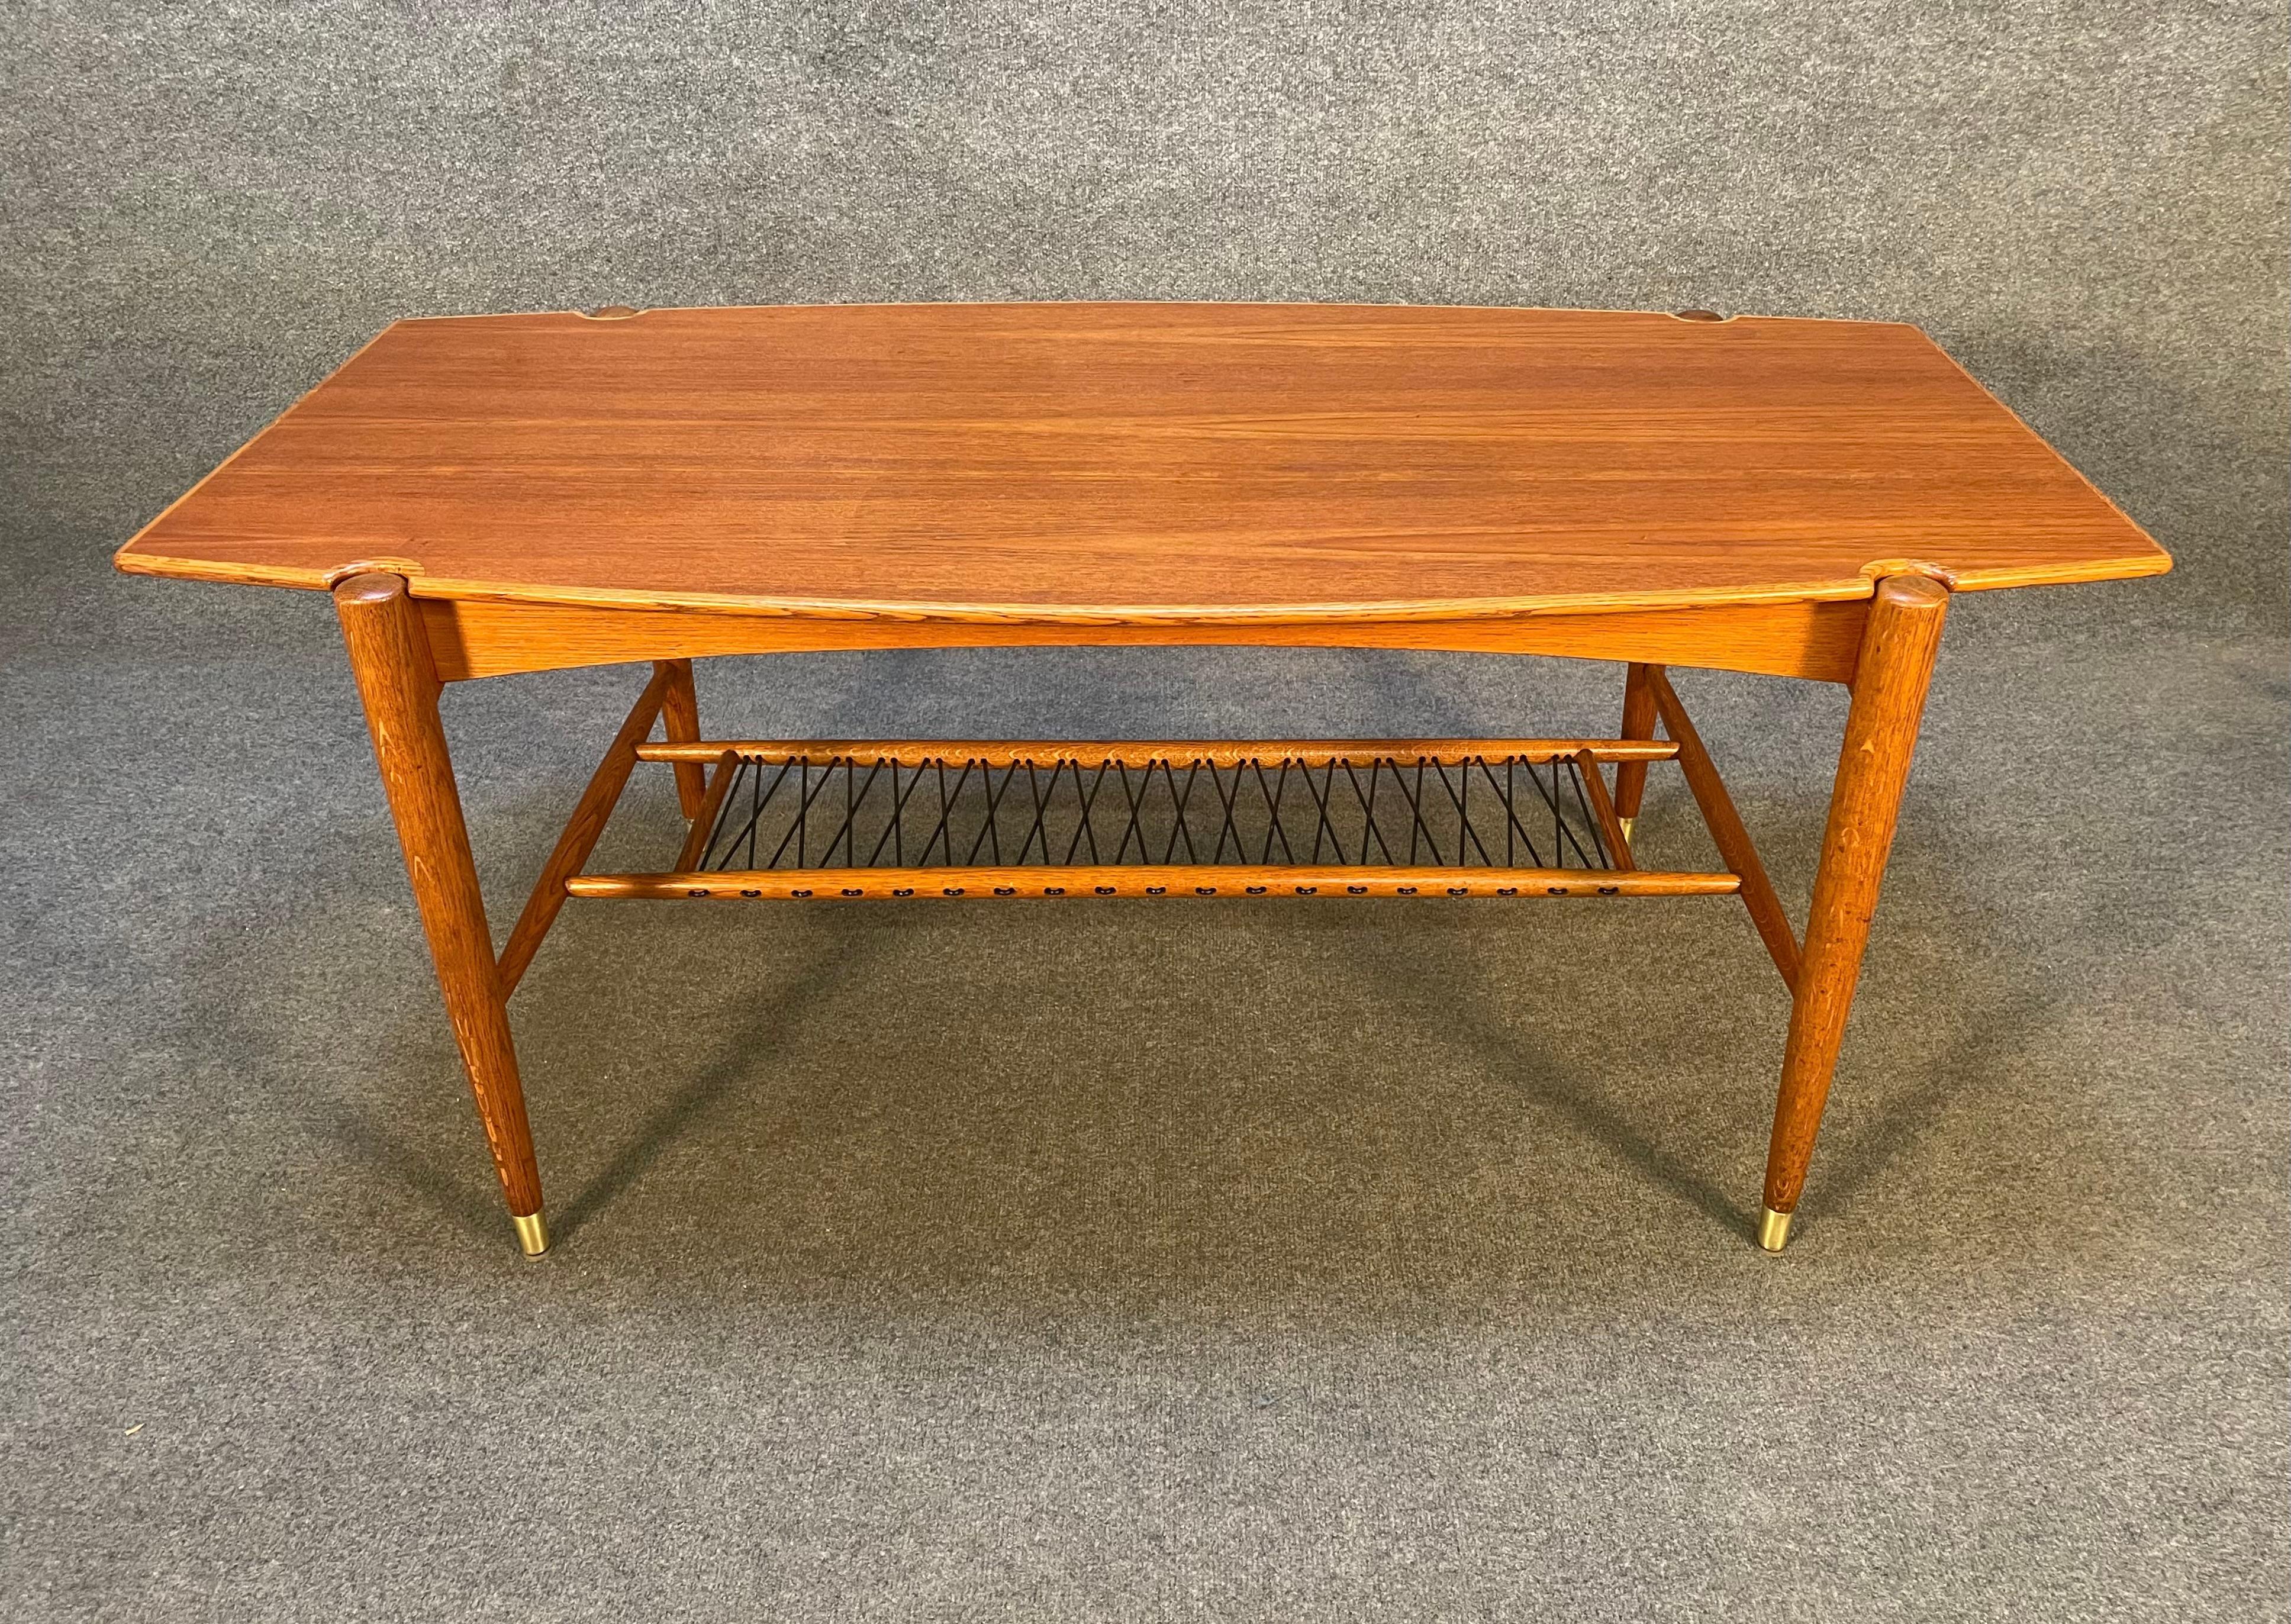 Mid-20th Century Vintage Danish Mid-Century Modern Teak and Oak Coffee Table by Folke Ohlsson For Sale